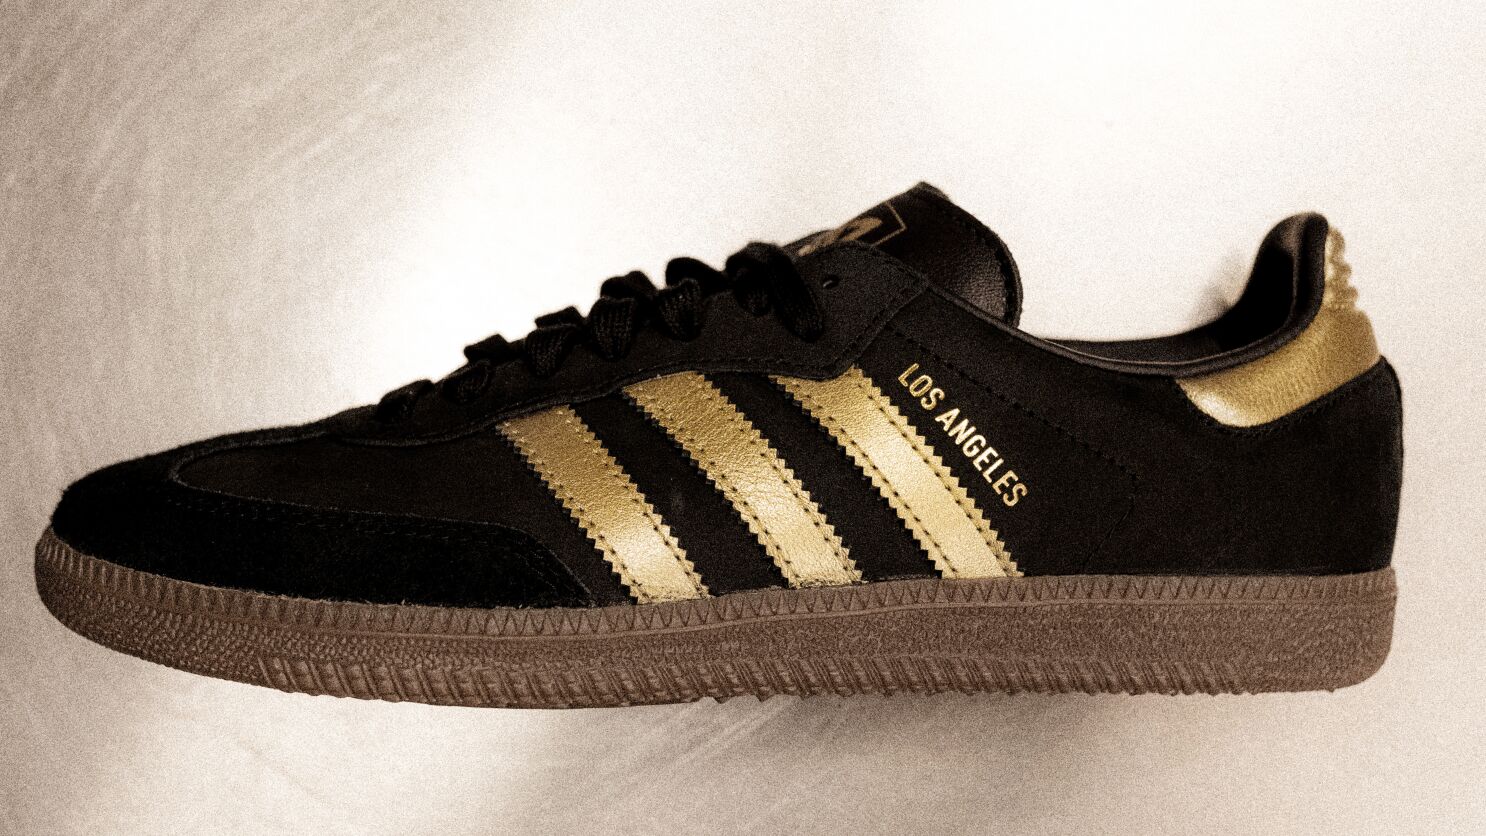 Adidas soccer-inspired sneaker coming Aug. 22 Los Angeles